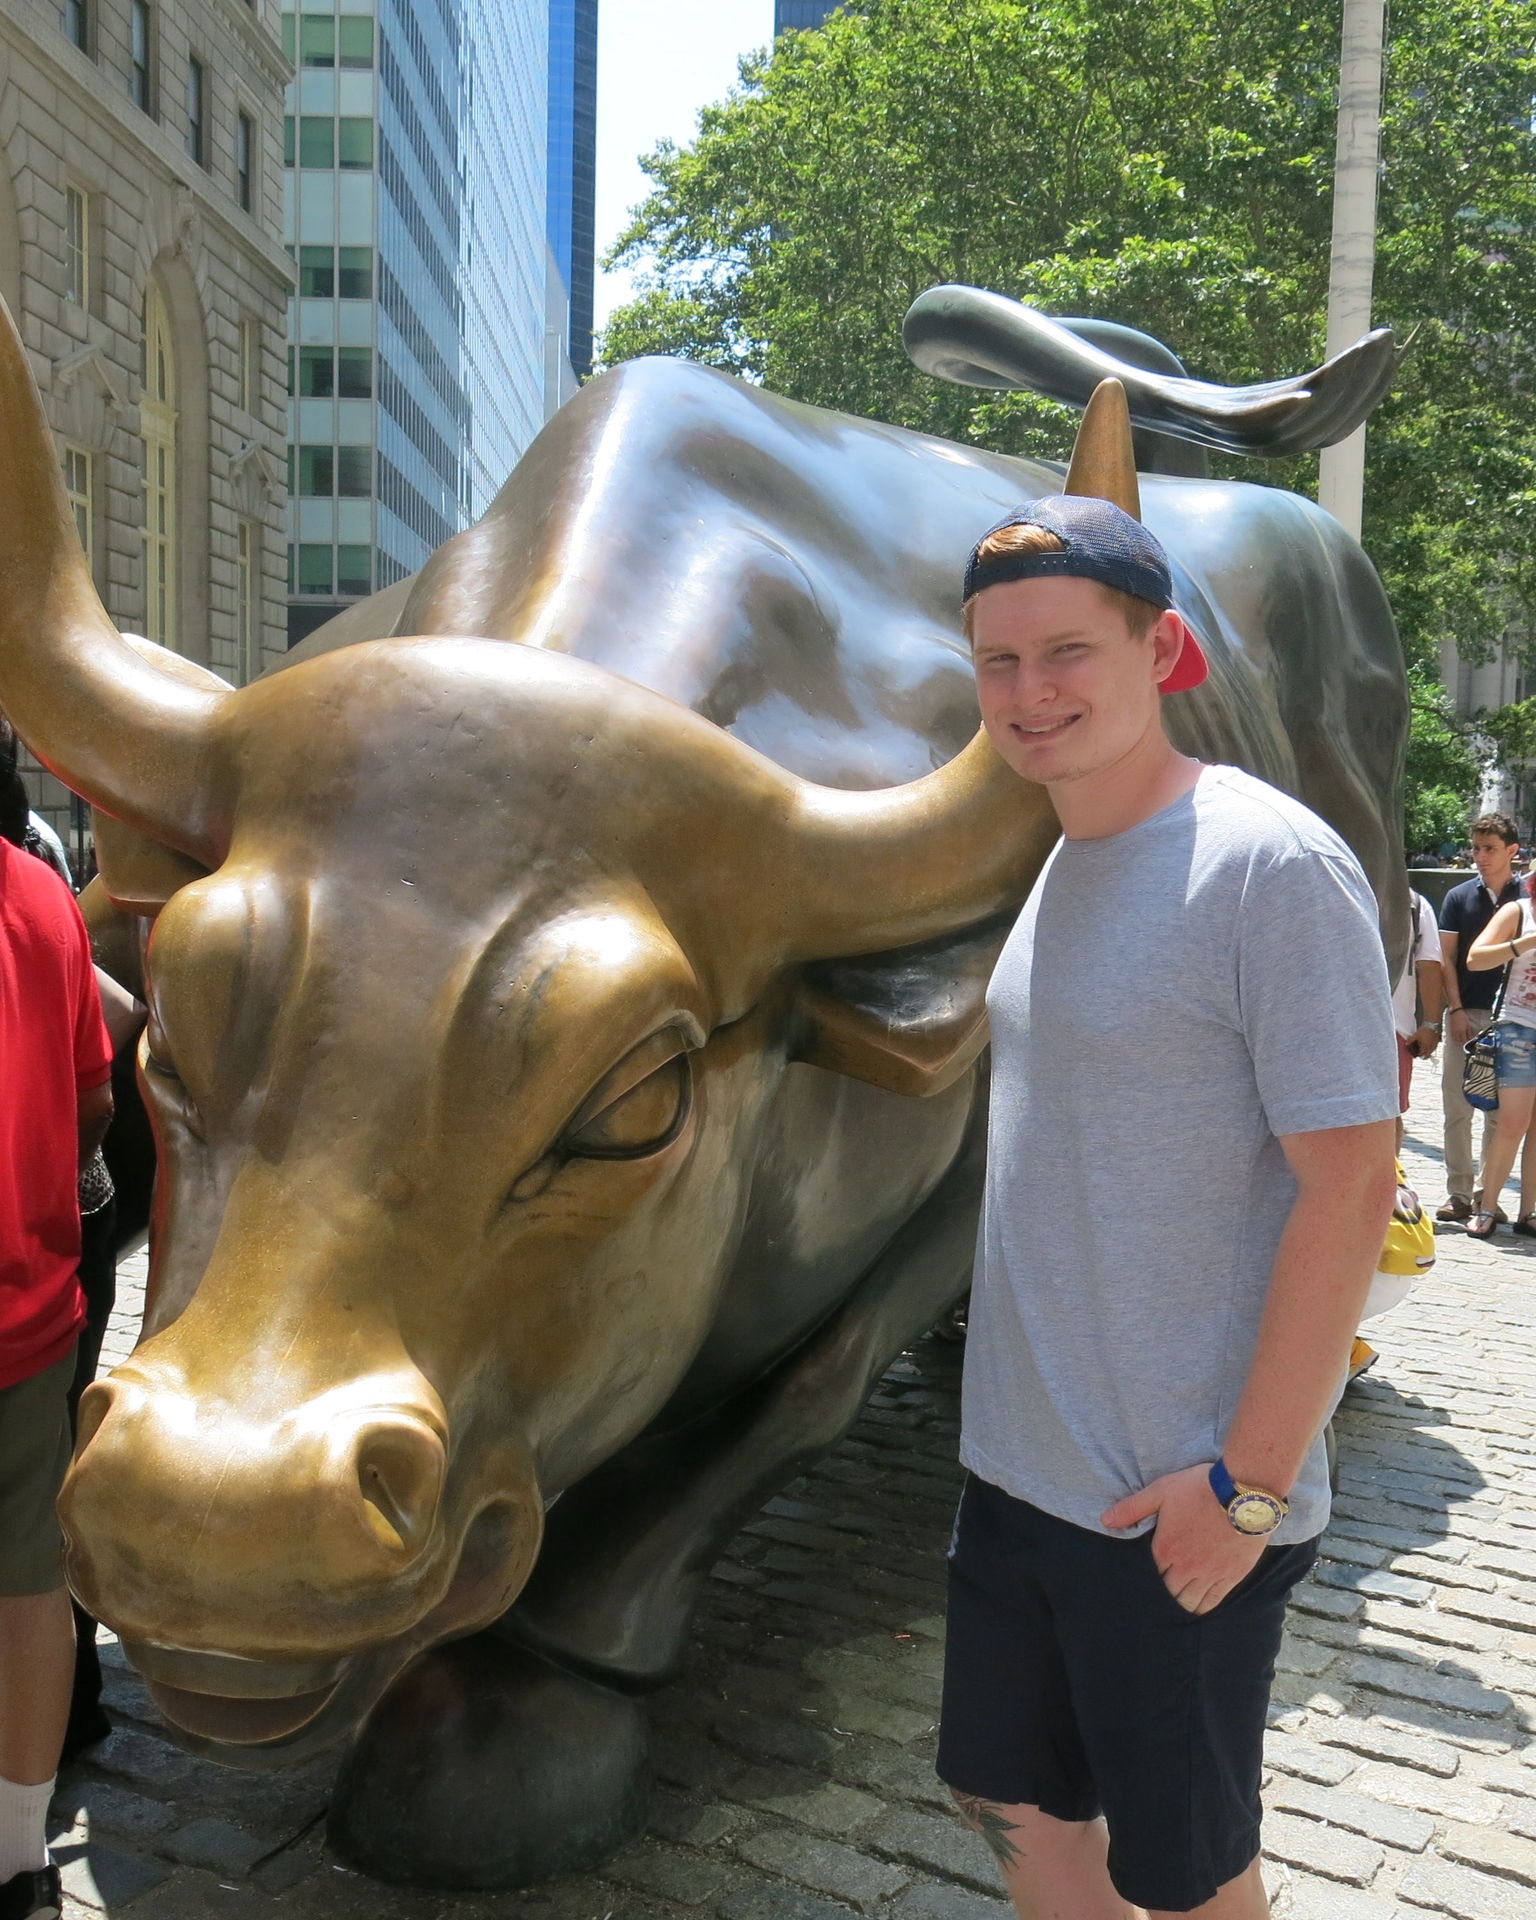 the-famous-bull-of-wall-st-photo_13573940-1536tall